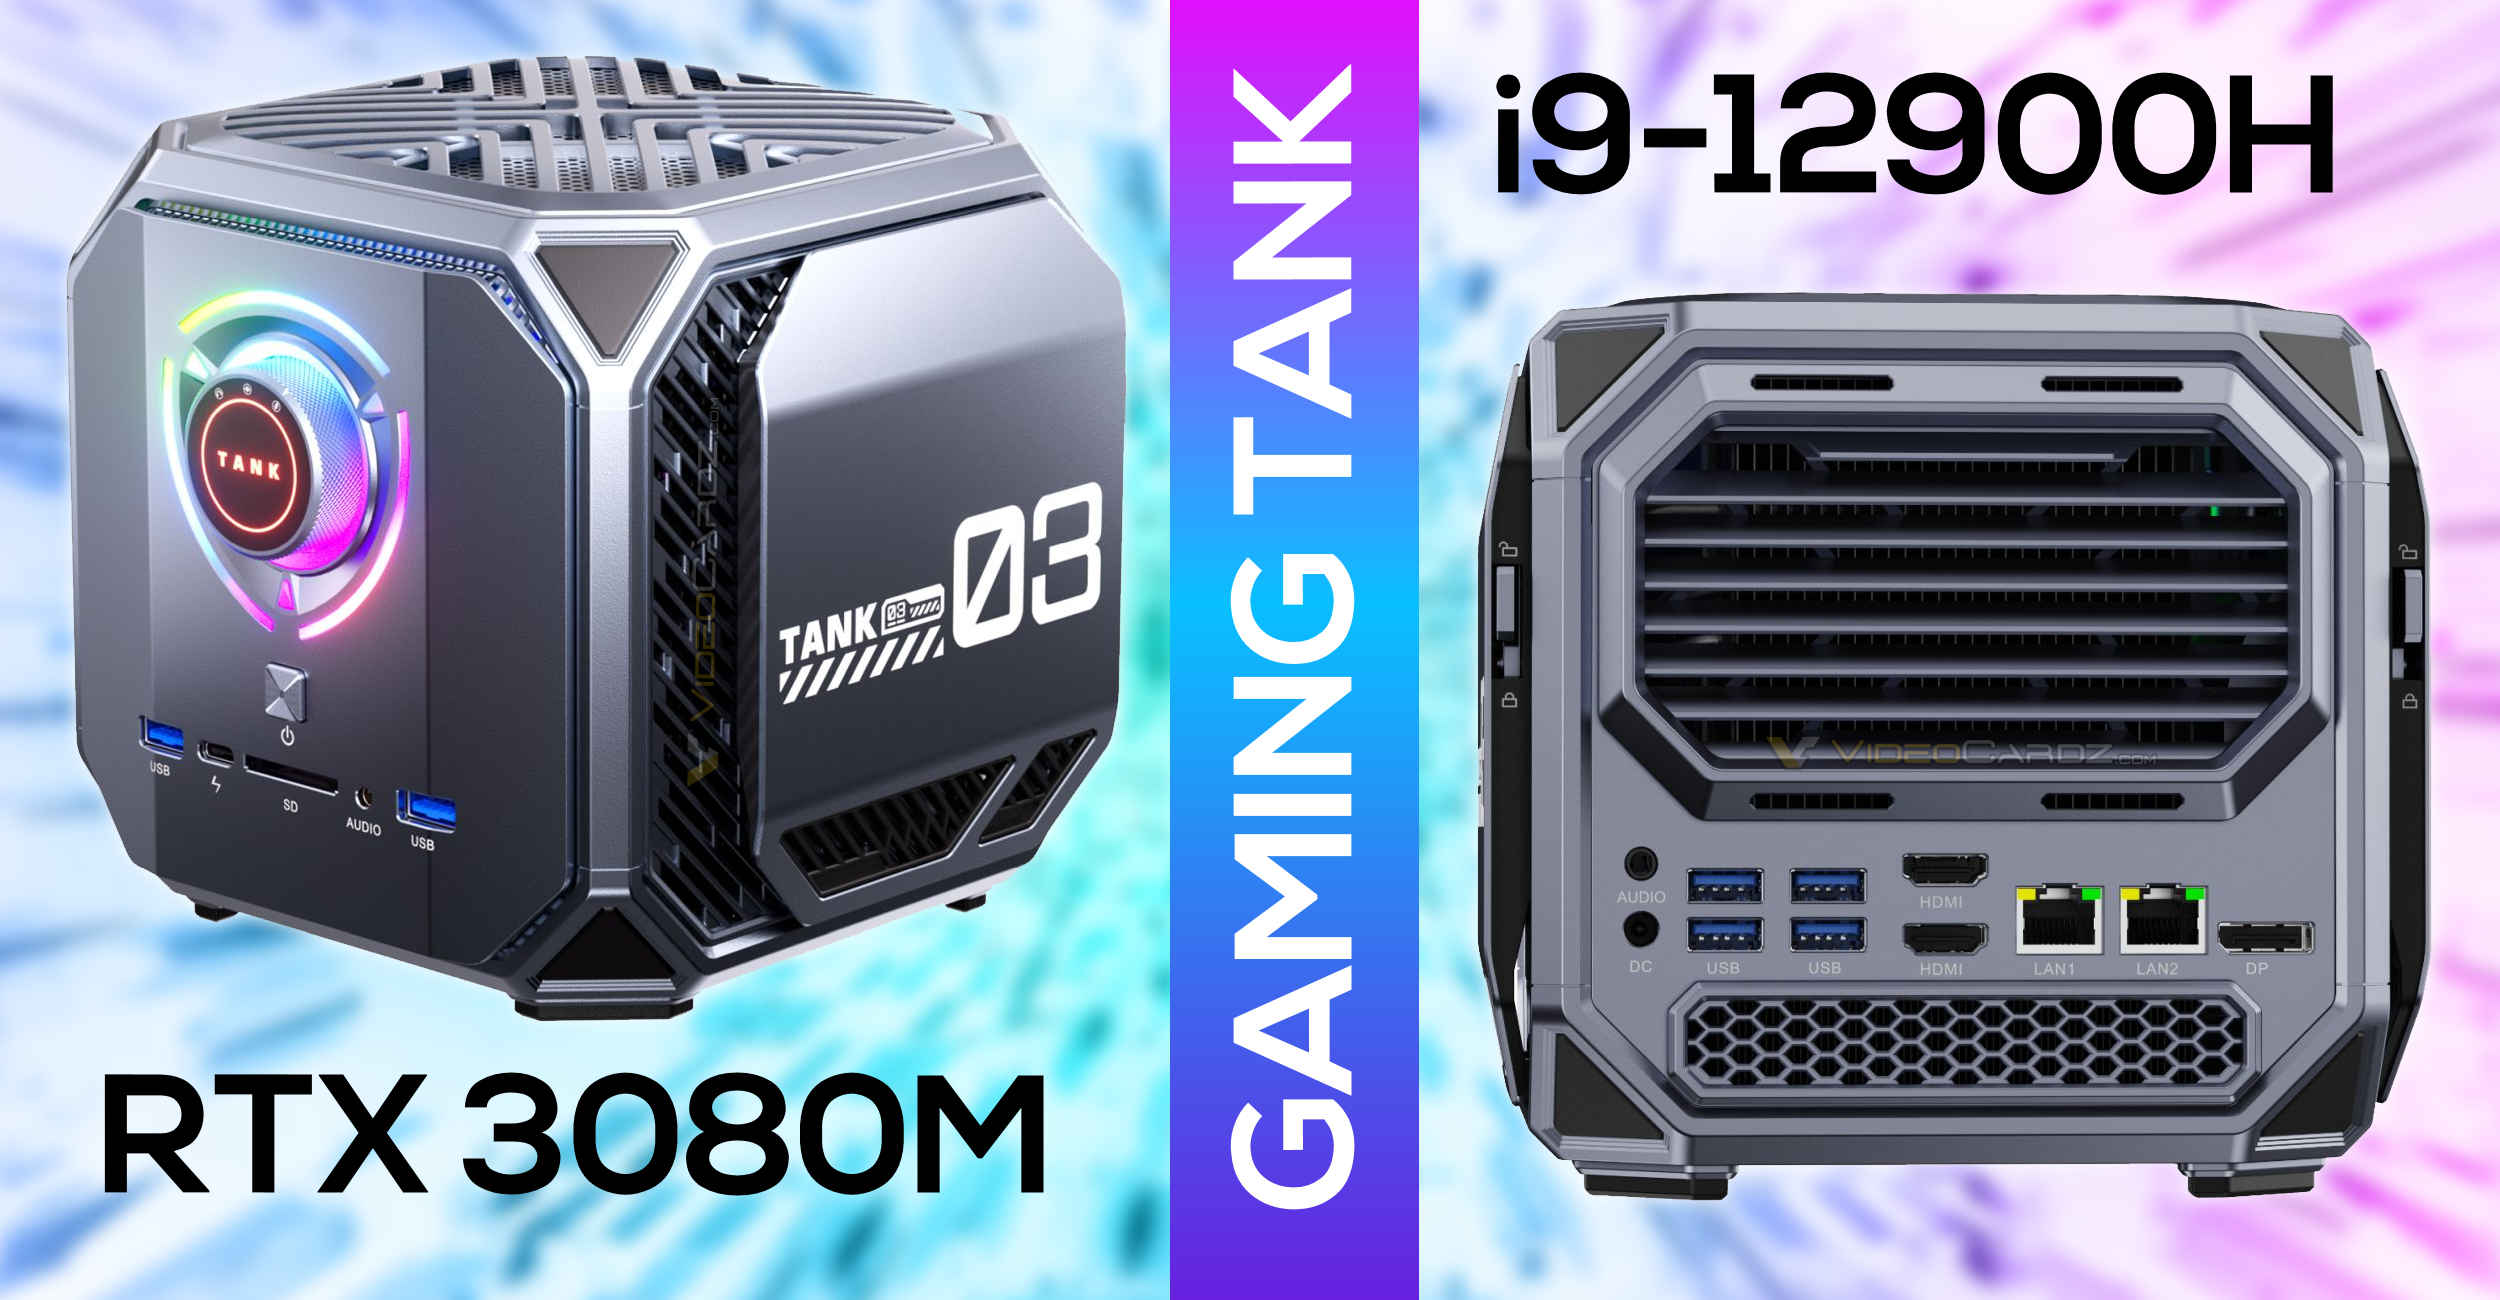 ACEMAGIC TANK 03 is cube-shaped mini PC with up to Core i9-12900H and  NVIDIA graphics - Liliputing